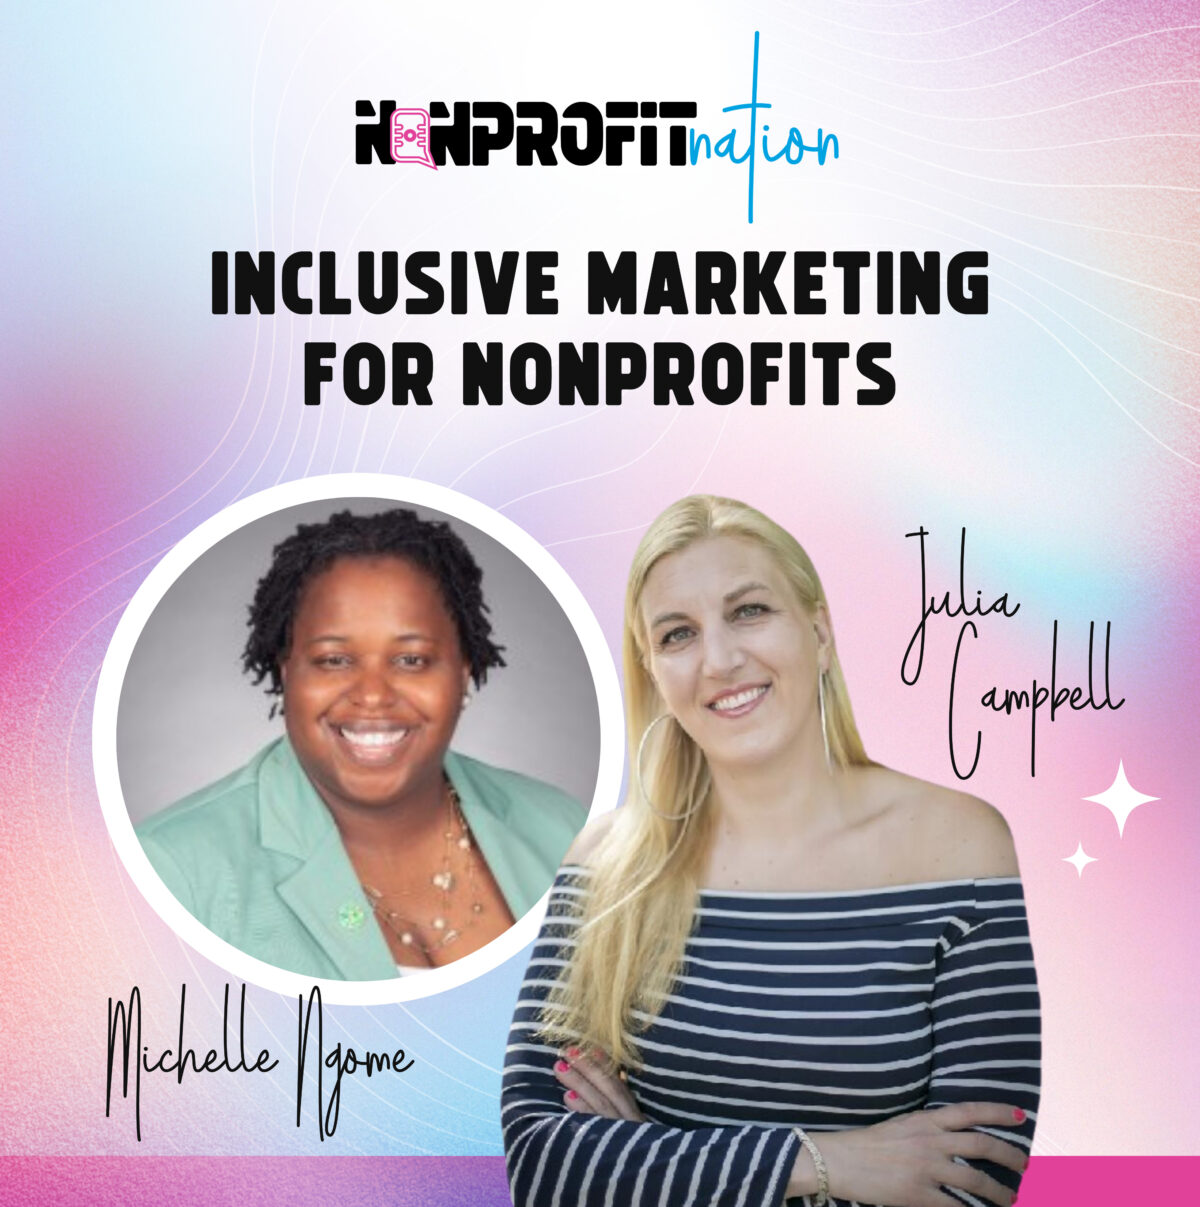 How to Make Your Marketing More Inclusive with Michelle Ngome